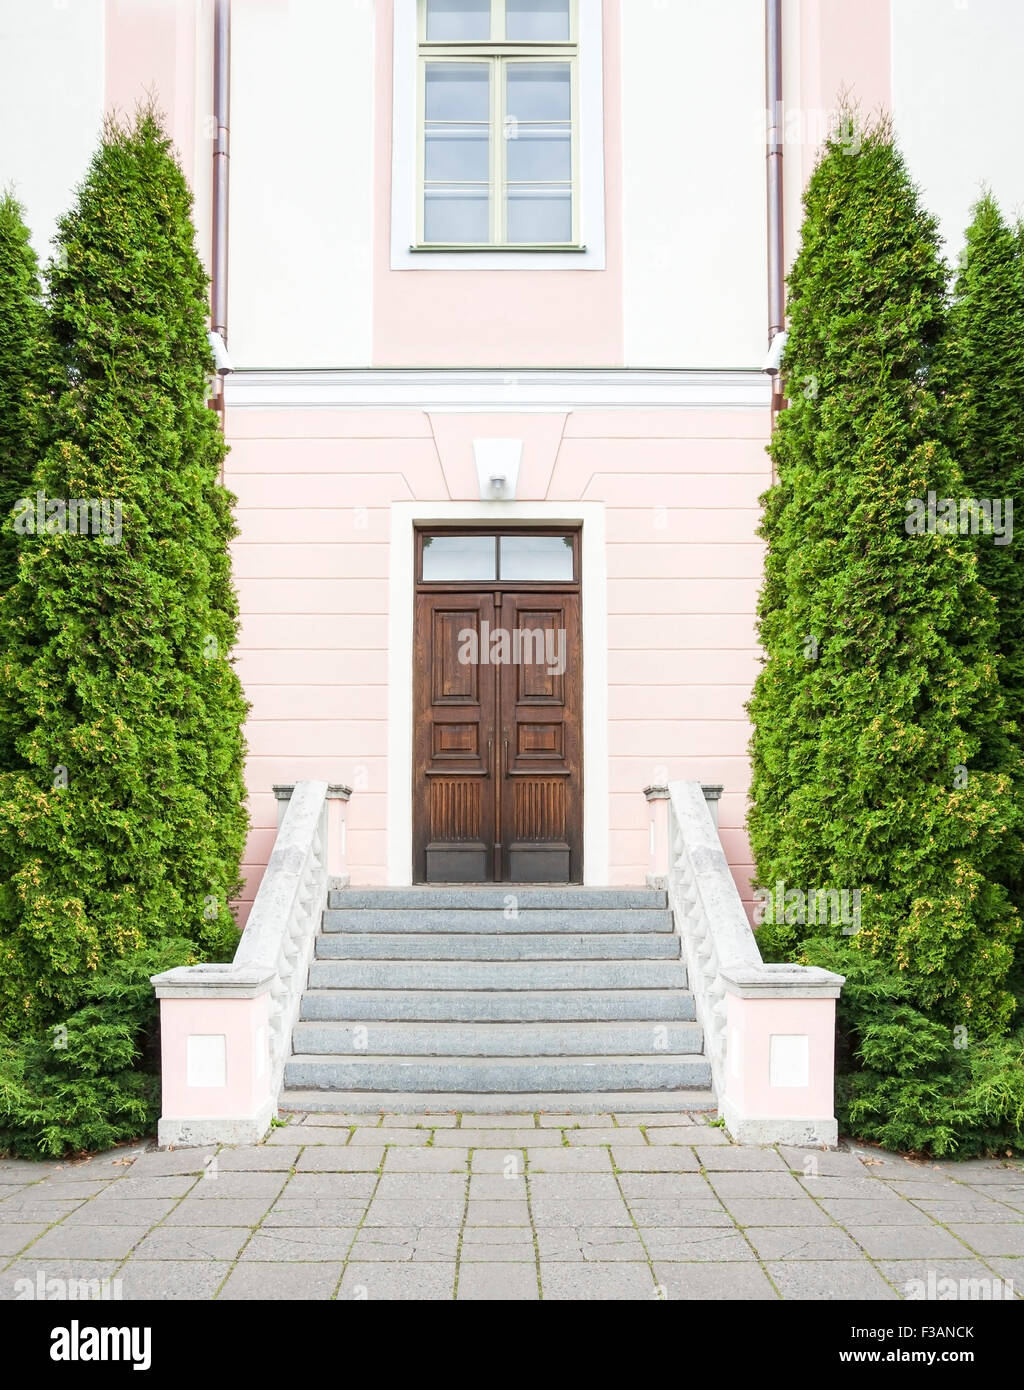 Stairway with tall green trees asides leading to a pink stone house with a dark brown wood door Stock Photo